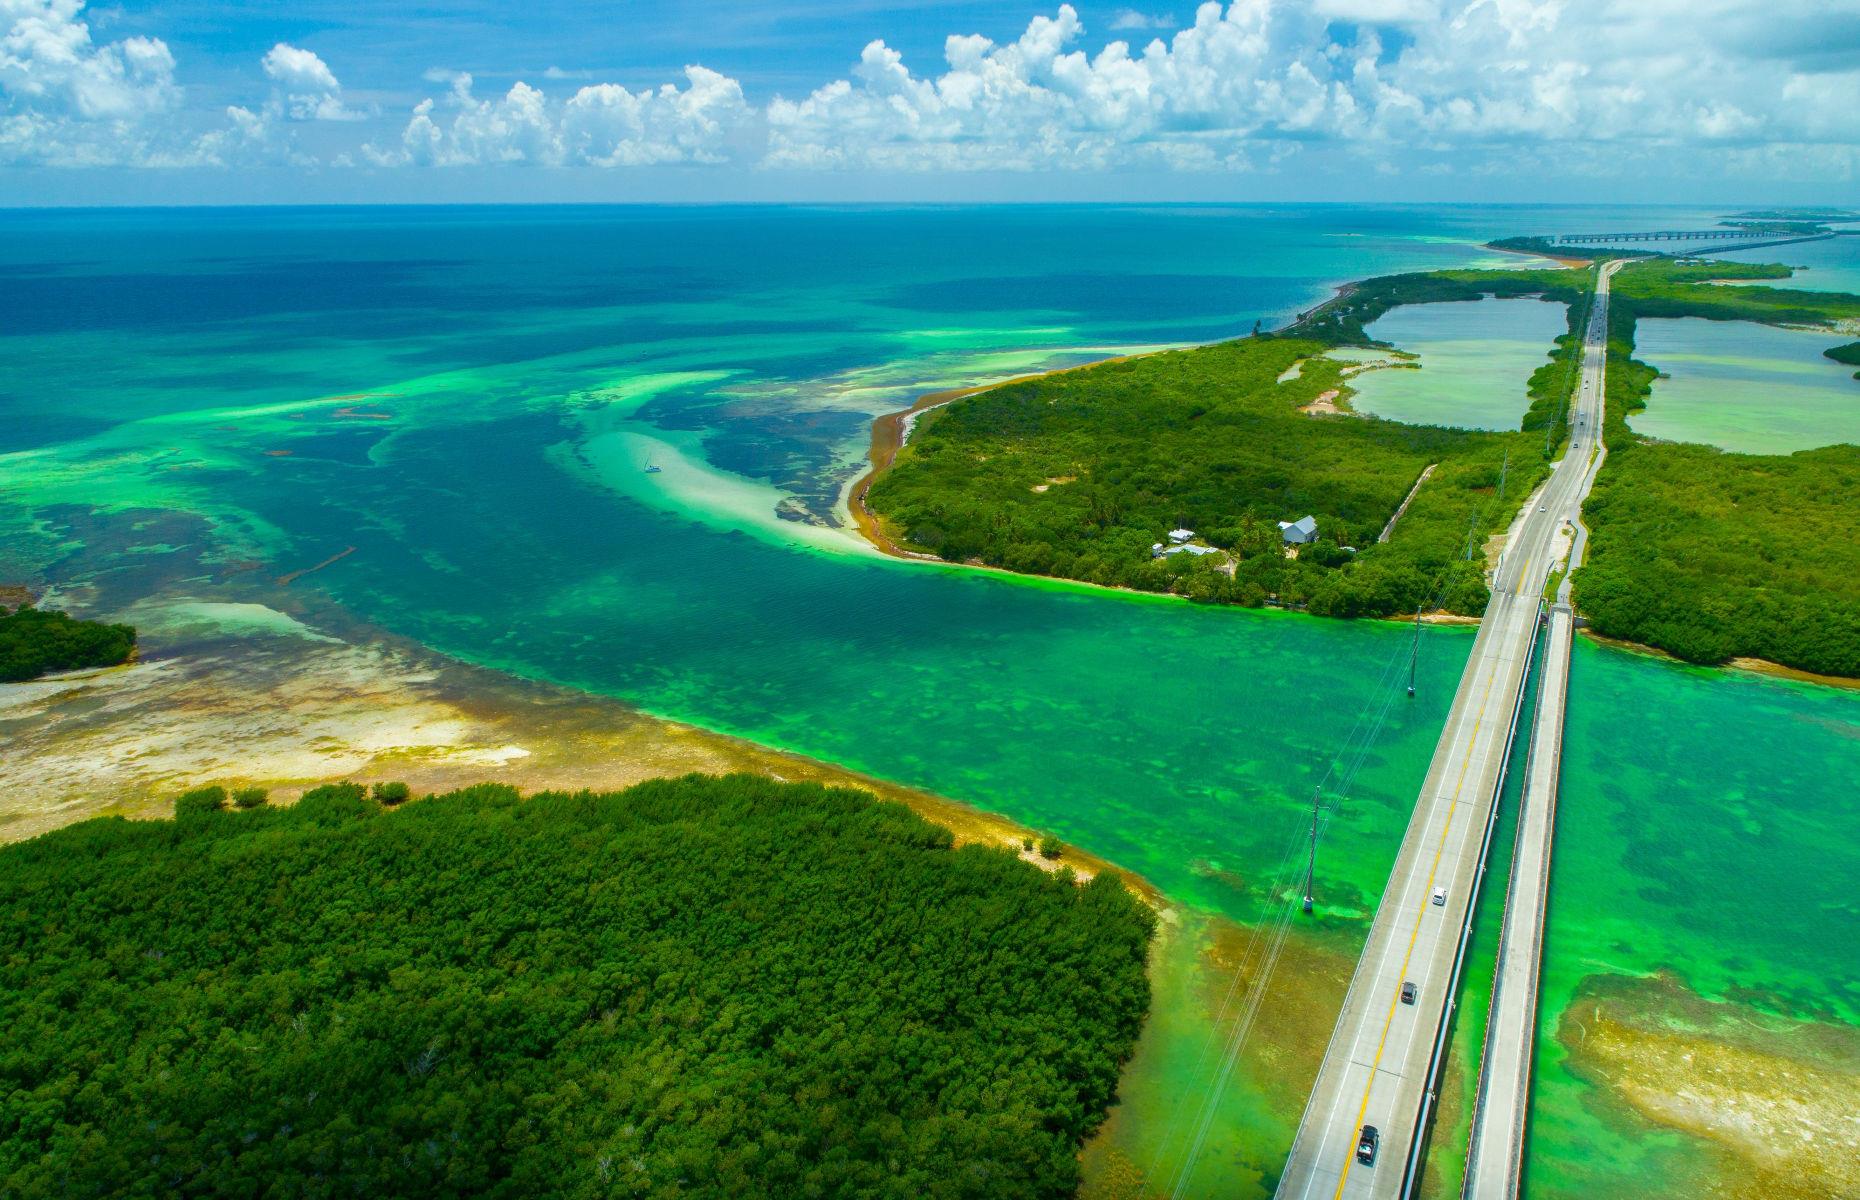 <p>Epic ocean views are the highlight of <a href="https://fla-keys.com/the-highway-that-goes-to-sea/">this 113-mile (182km) route</a>, which begins close to Miami and stretches out through the Florida Keys, from Key Largo down to the quirky island city of Key West. Memorable experiences abound, especially for families who love spending time in, on and around water. The road really does soar over the waves, and the views alone make the two-day (at least) trip worthwhile.</p>  <p><a href="https://www.loveexploring.com/news/145103/things-to-do-in-key-west-florida-usa-holidays"><strong>Uncovering Key West: 6 things to do in Florida's quirkiest city</strong></a></p>